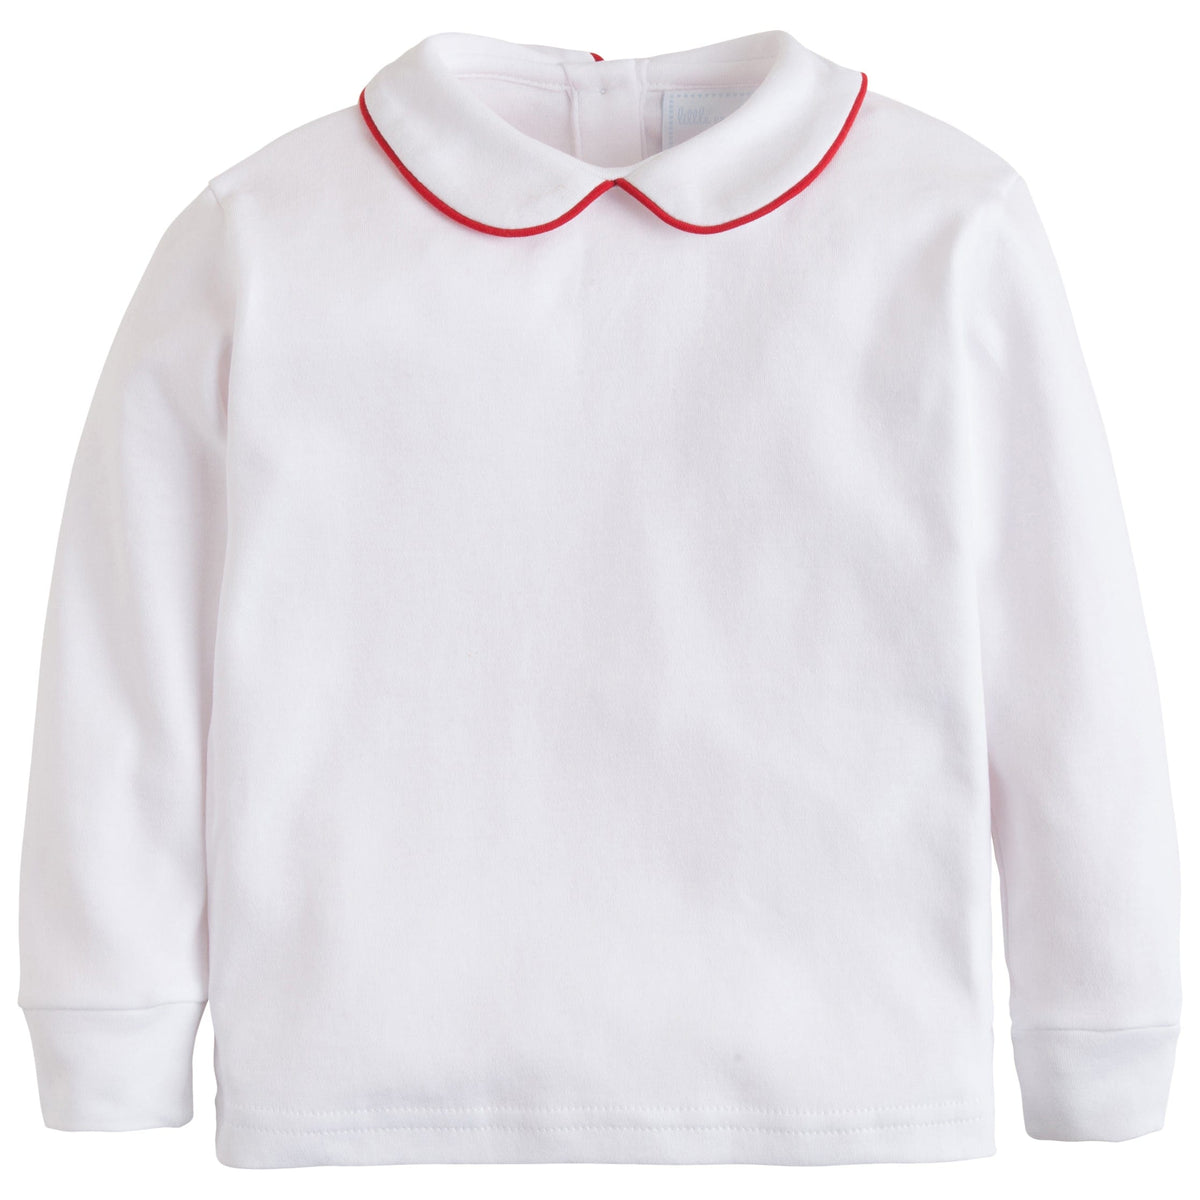 seguridadindustrialcr classic childrens clothing boys white shirt with peter pan collar and red piping on collar